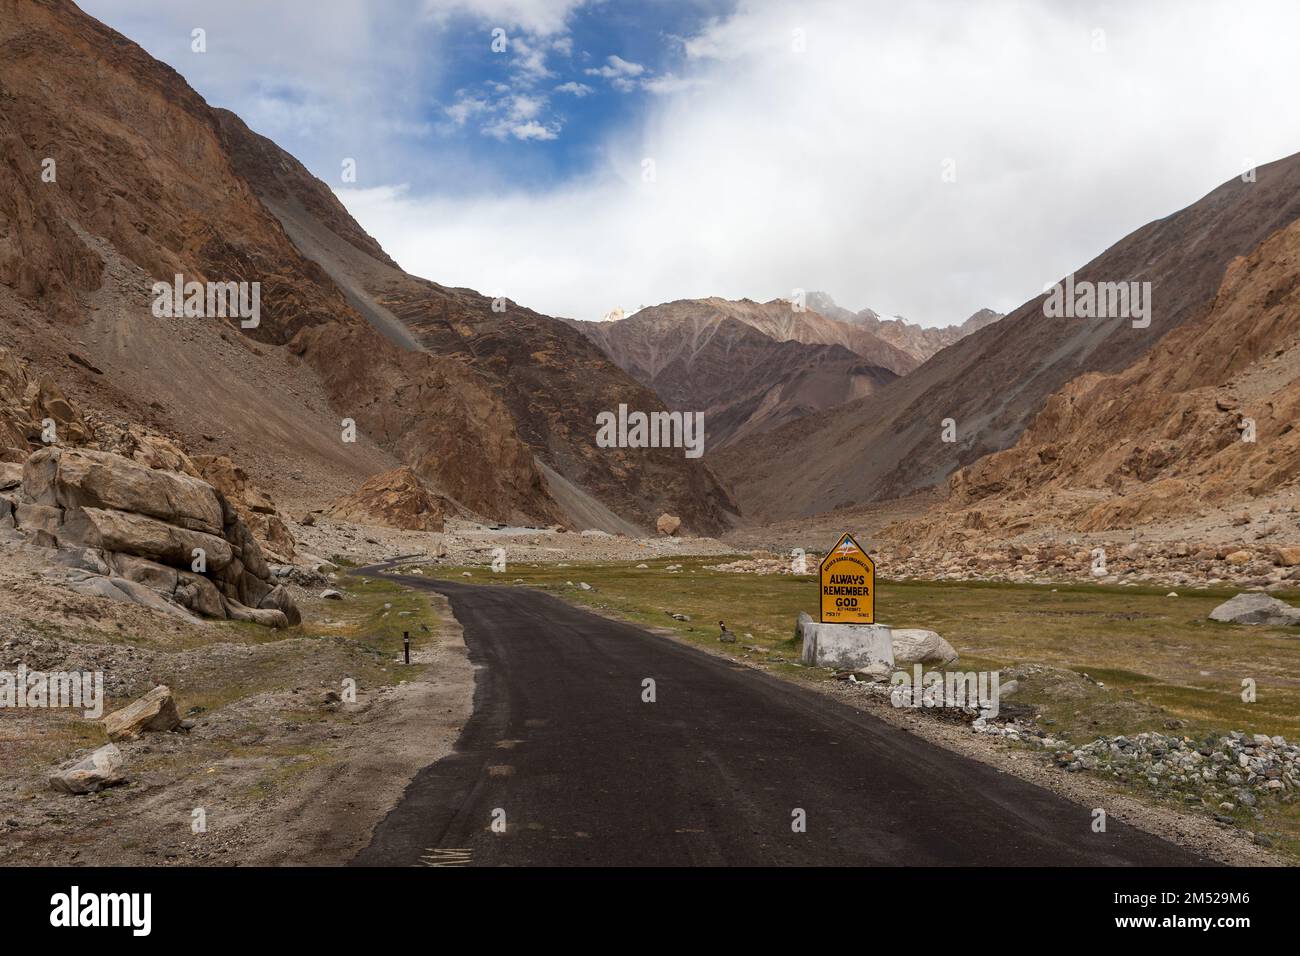 Always Remember God sign on the road in Ladakh mountains. Stock Photo